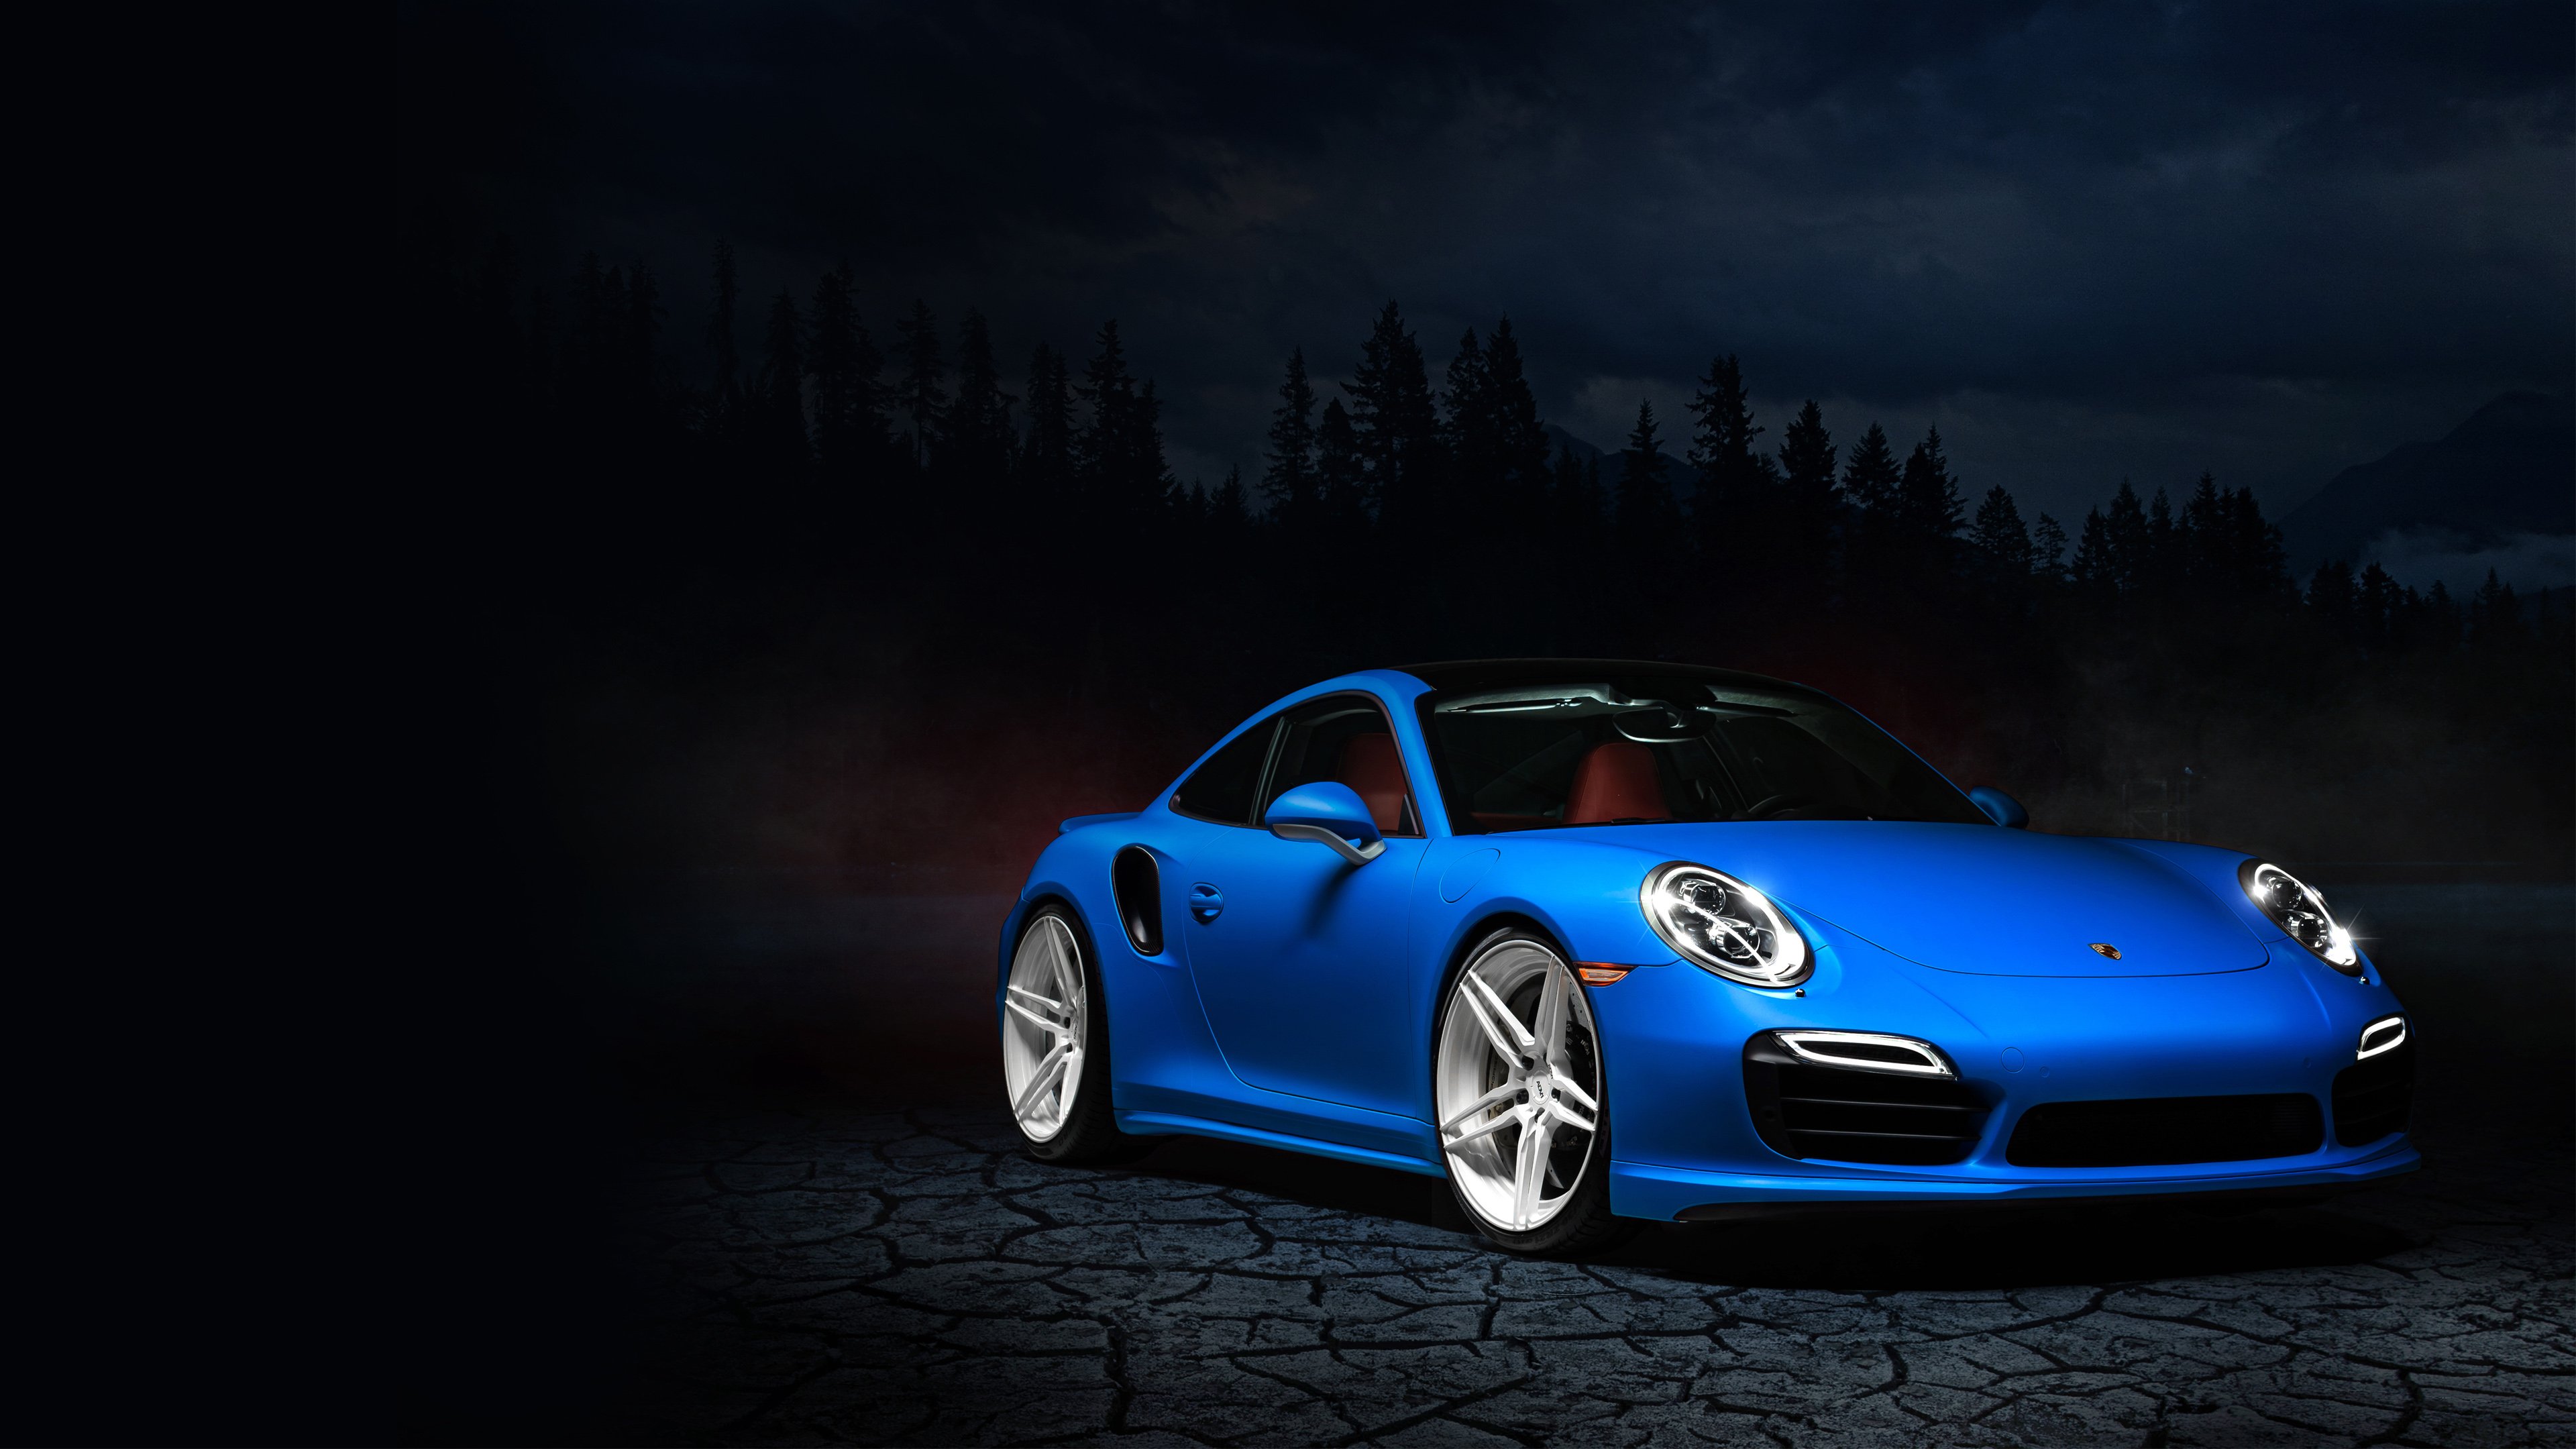 Porsche Wallpapers and Background Images   stmednet